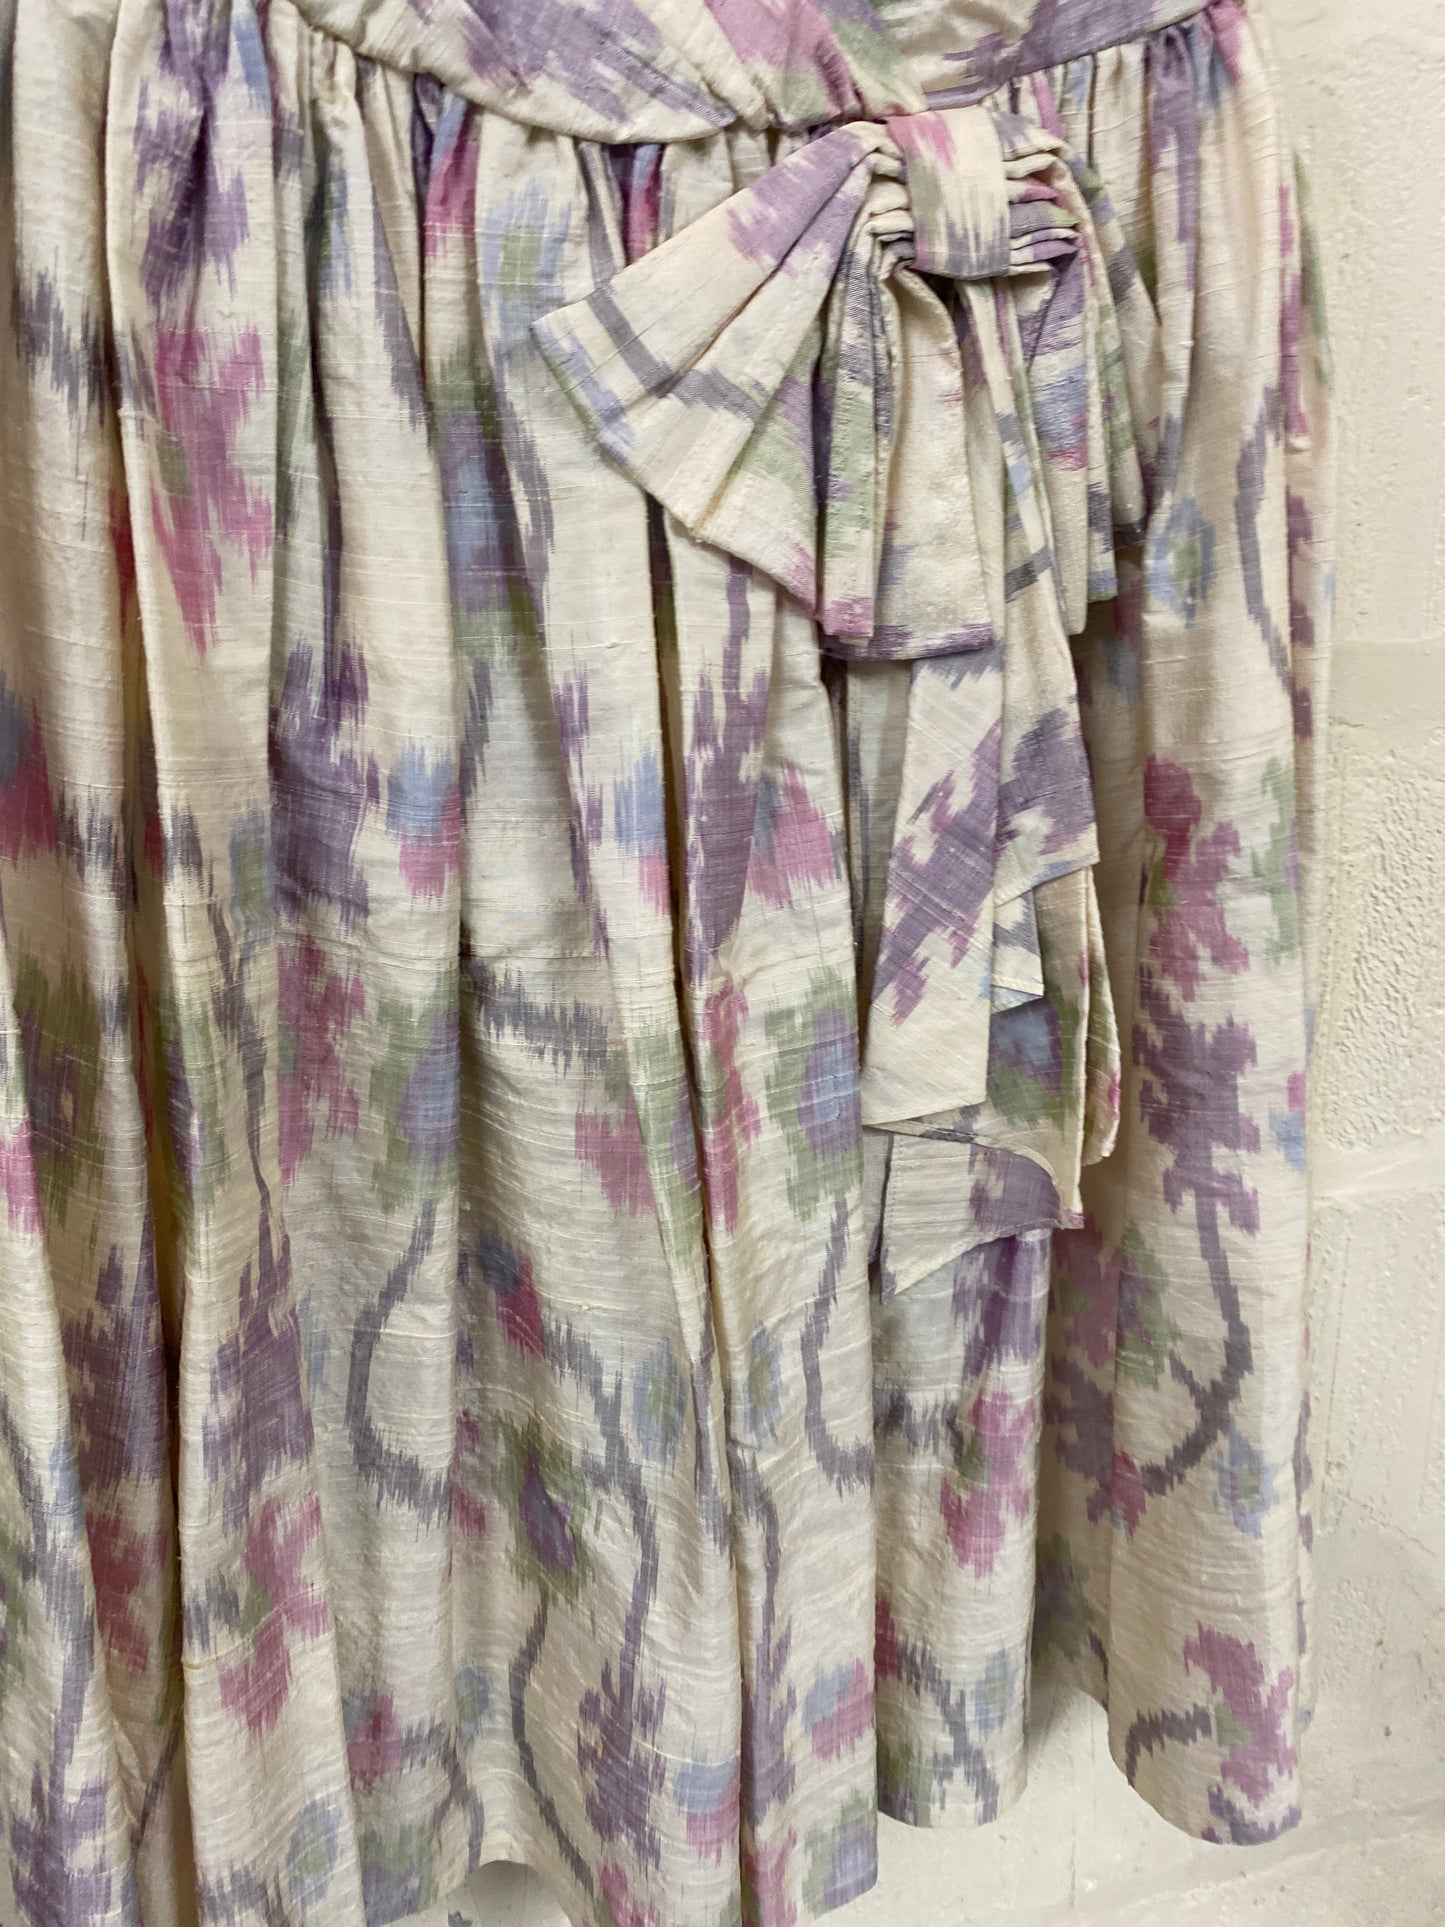 1980s Strapless Cream Silk Dress with Pink and Purple pattern Size 6